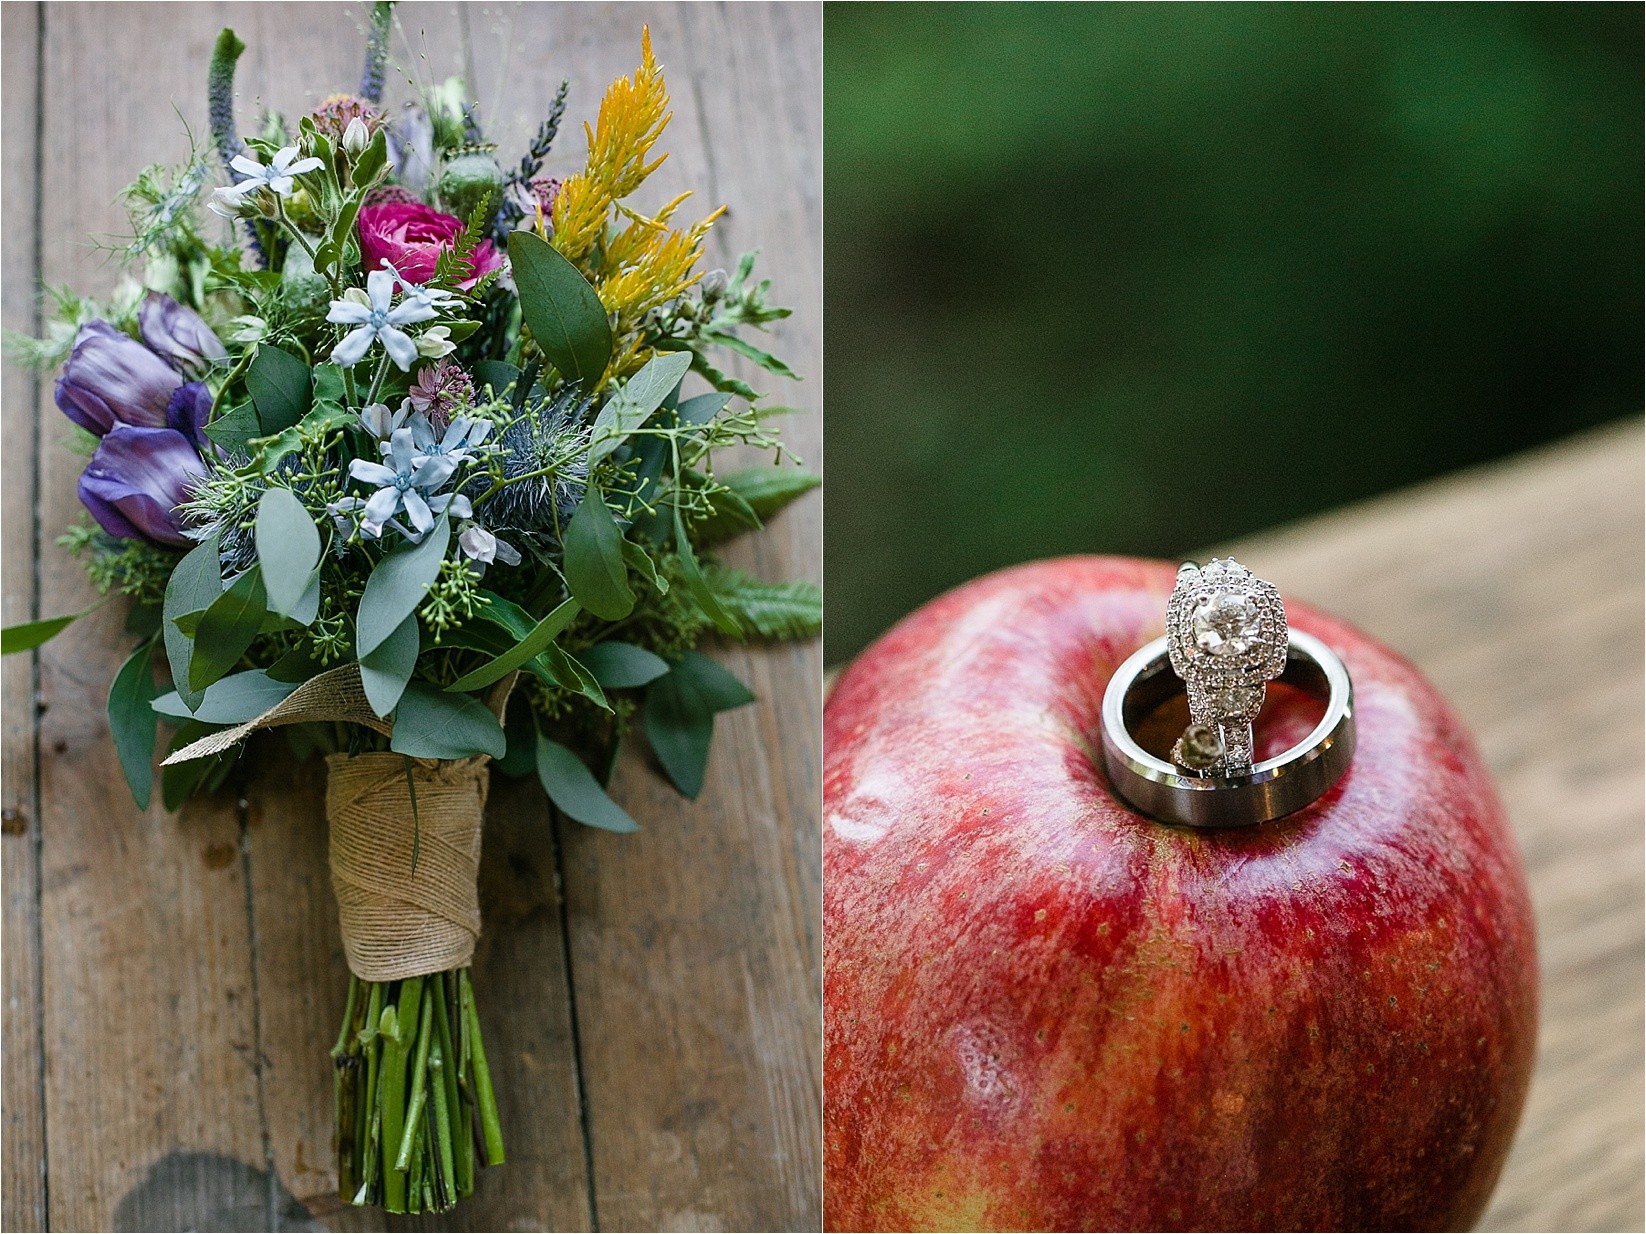 Flowers and apples at Caroline and Evans mountain wedding at yesterday spaces in asheville leicester north caroline